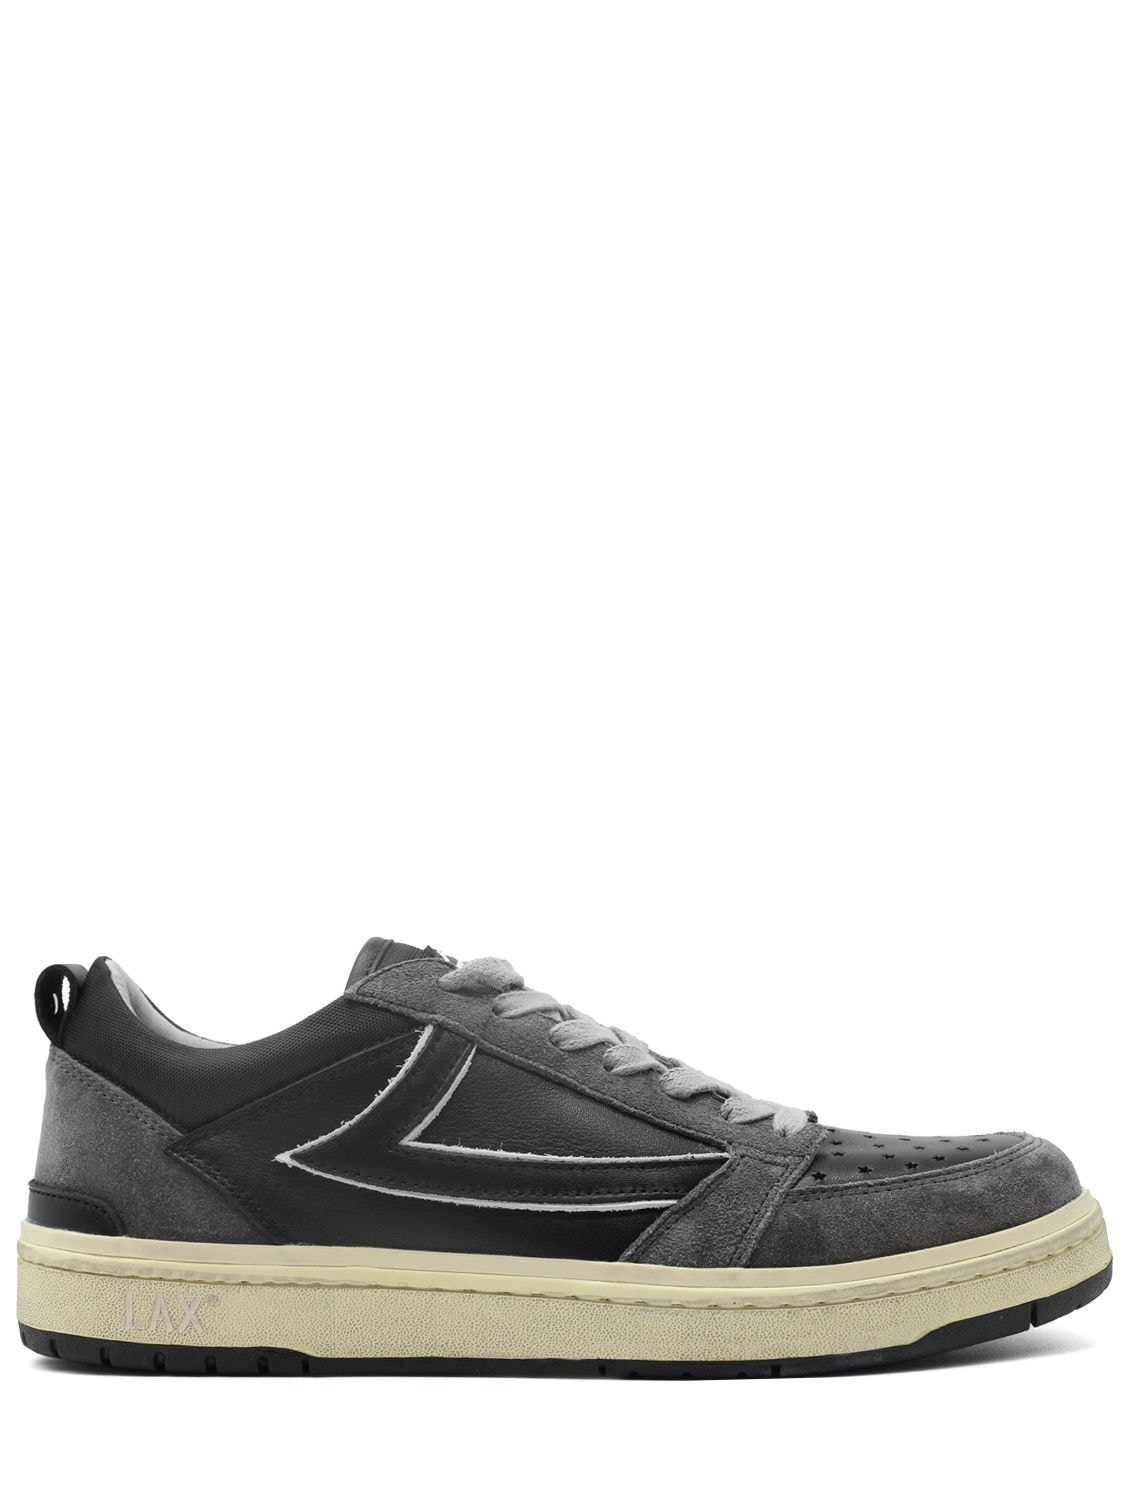 Htc Los Angeles Starlight Leather Low Top Sneakers In Black,grey